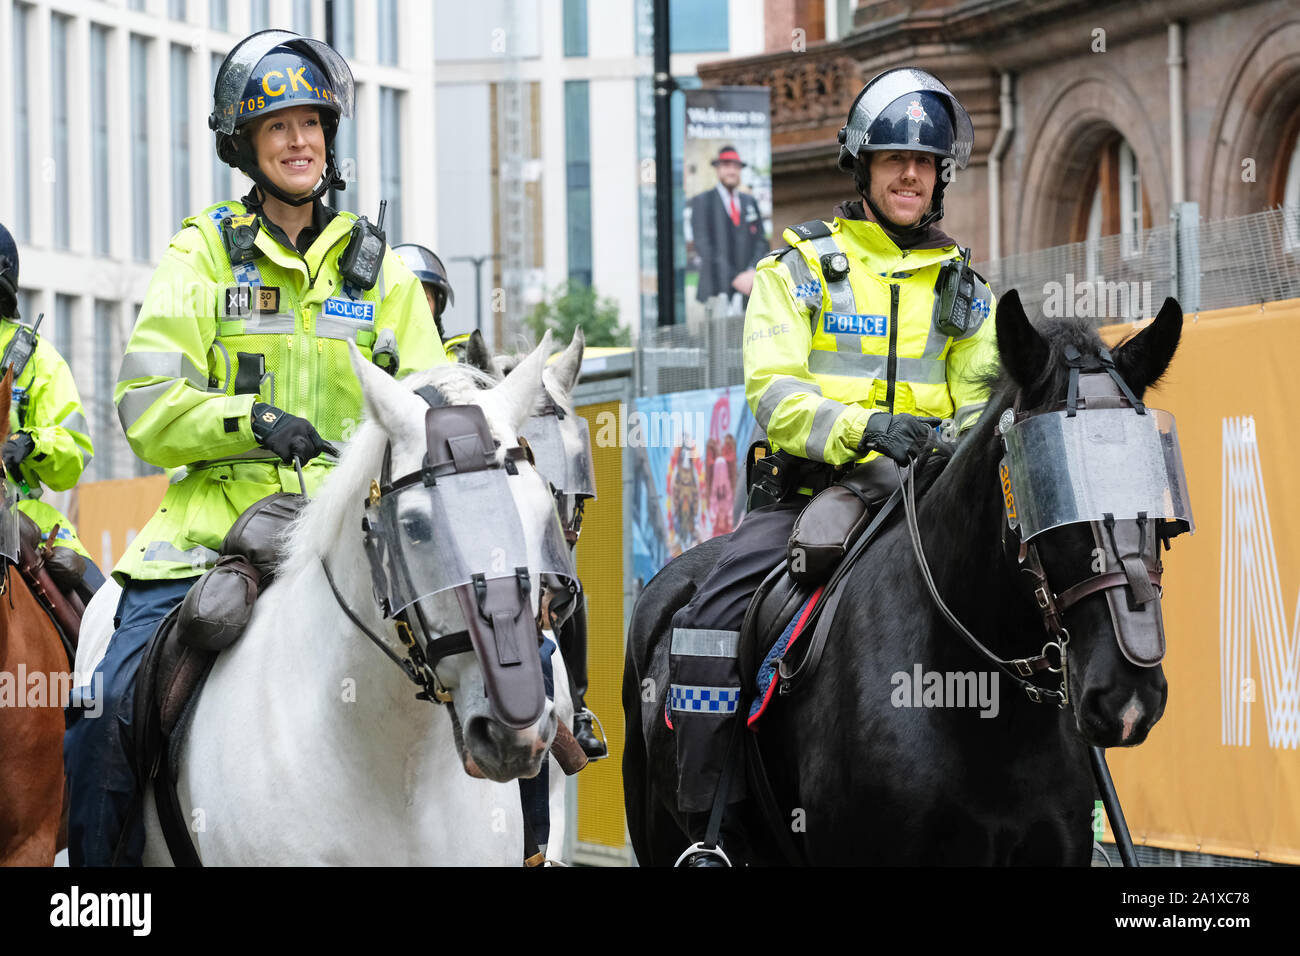 Manchester, UK.  Sunday 29th September 2019.  Police officers on horses patrol the area outside the Midland Hotel at the Conservative Party Conference on the opening day of the Tory event.  Photo Steven May / Alamy Live News Stock Photo